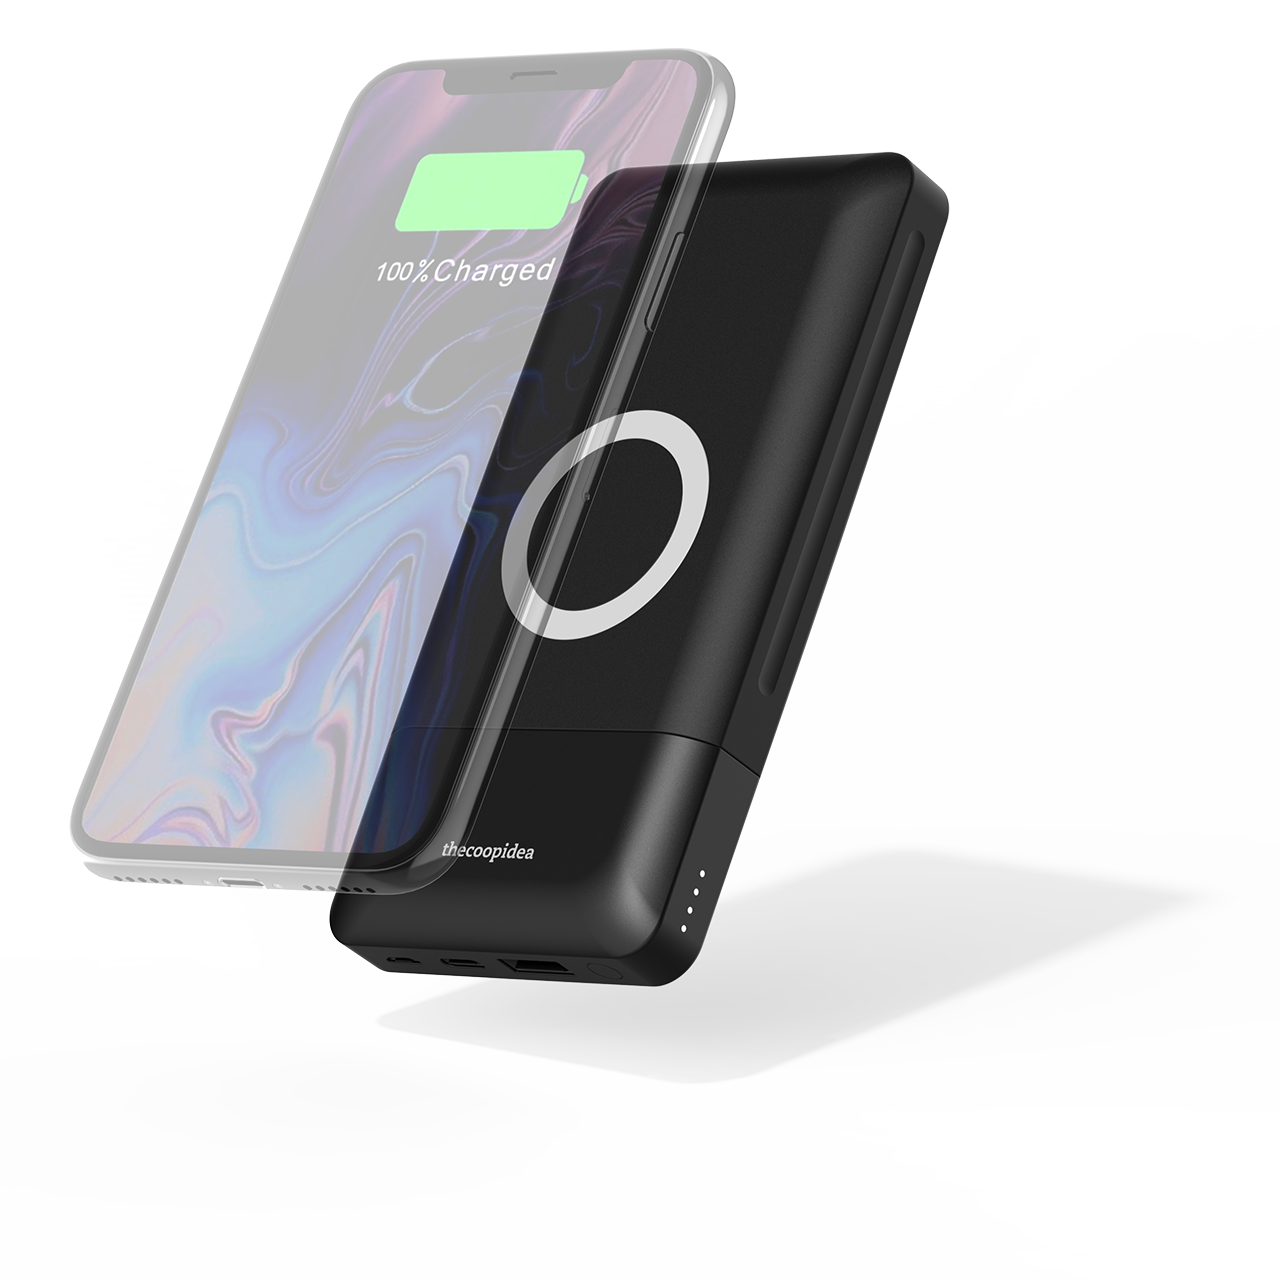 thecoopidea - Stack 18W PD + 10W Wireless Charging 10000mAh Powerbank